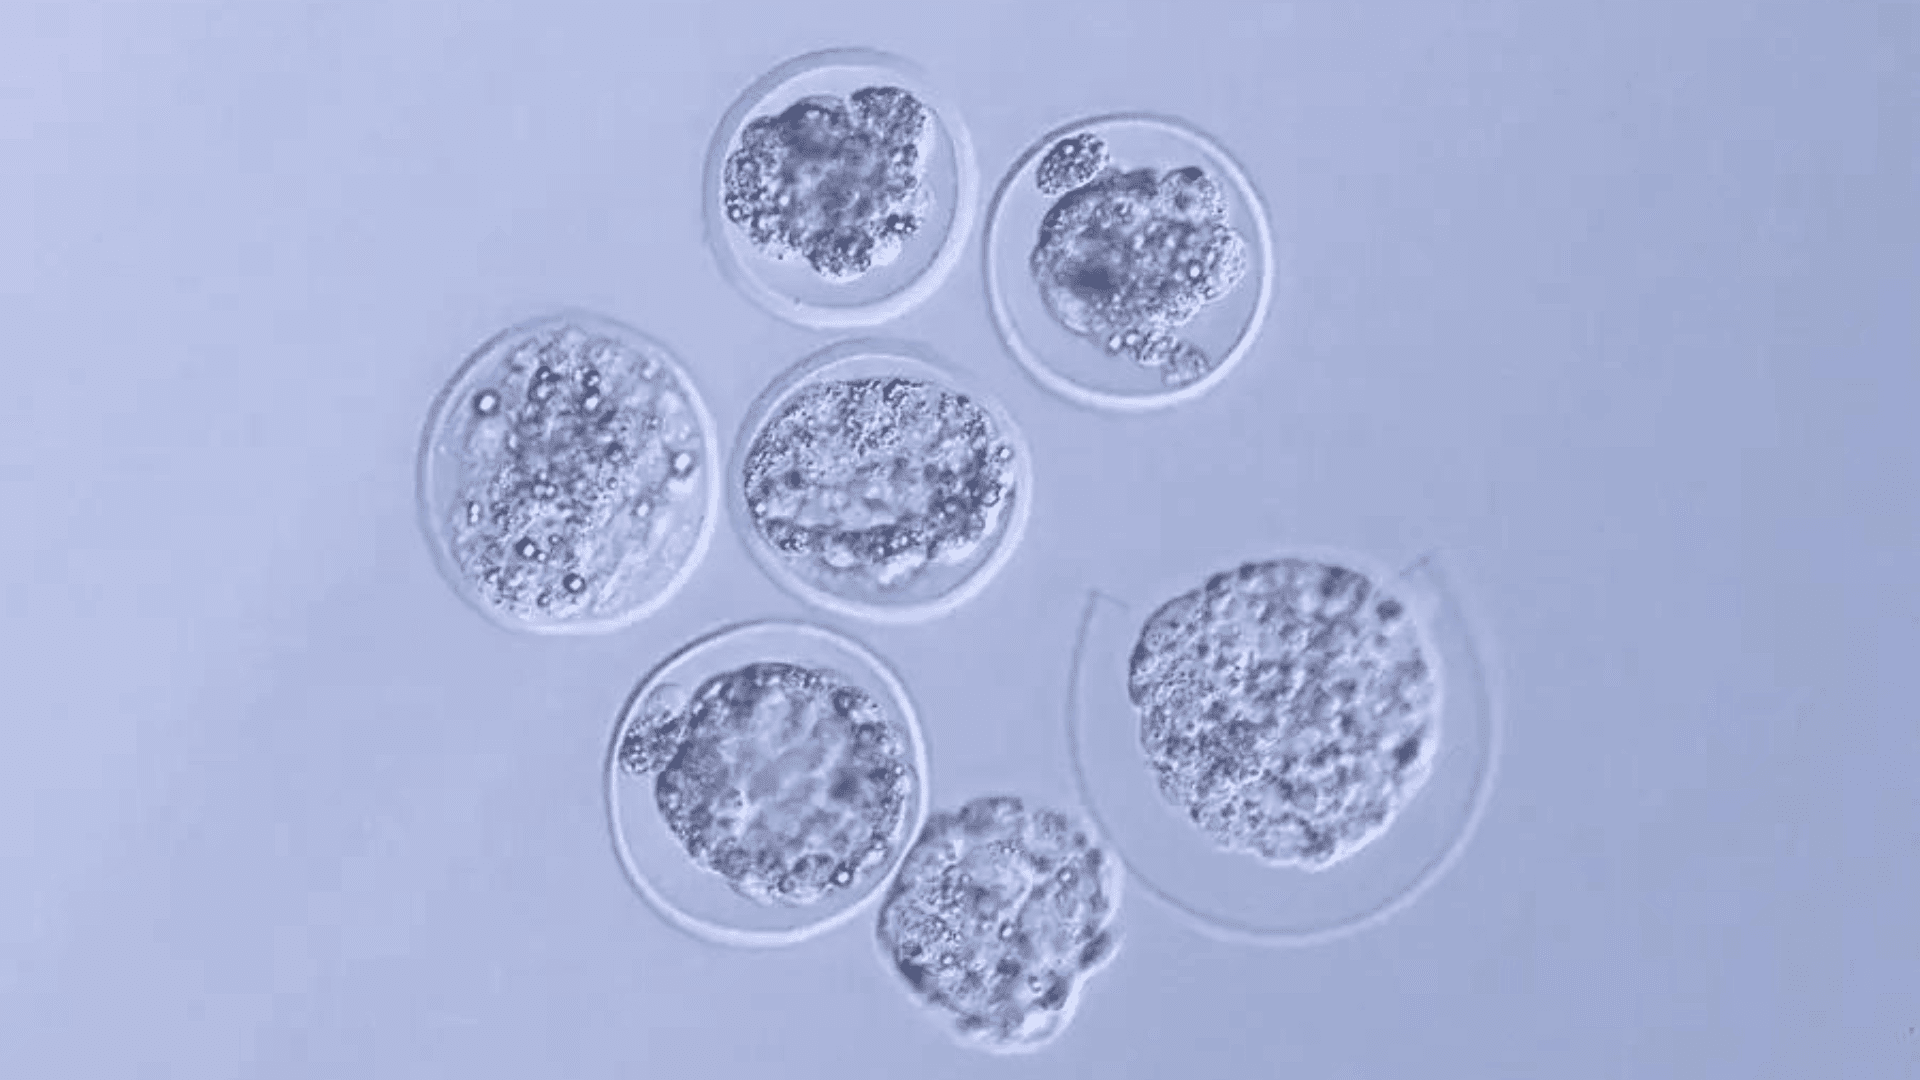 A microscope image of mouse embryos after they had returned from the International Space Station